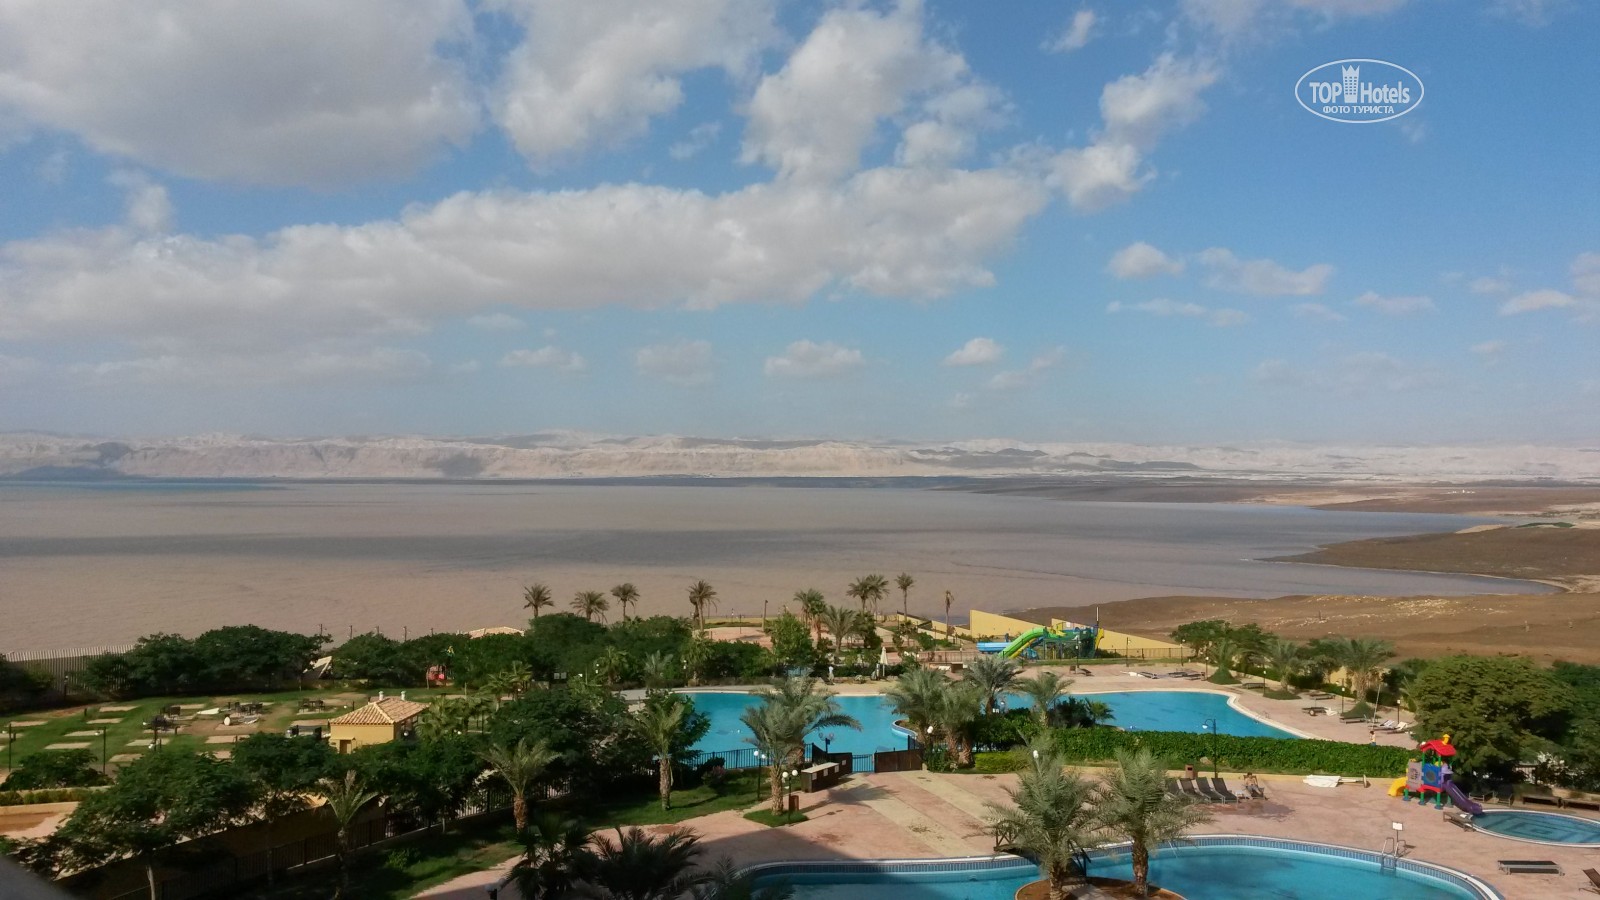 Grand East Hotel, Dead Sea, photos of tours